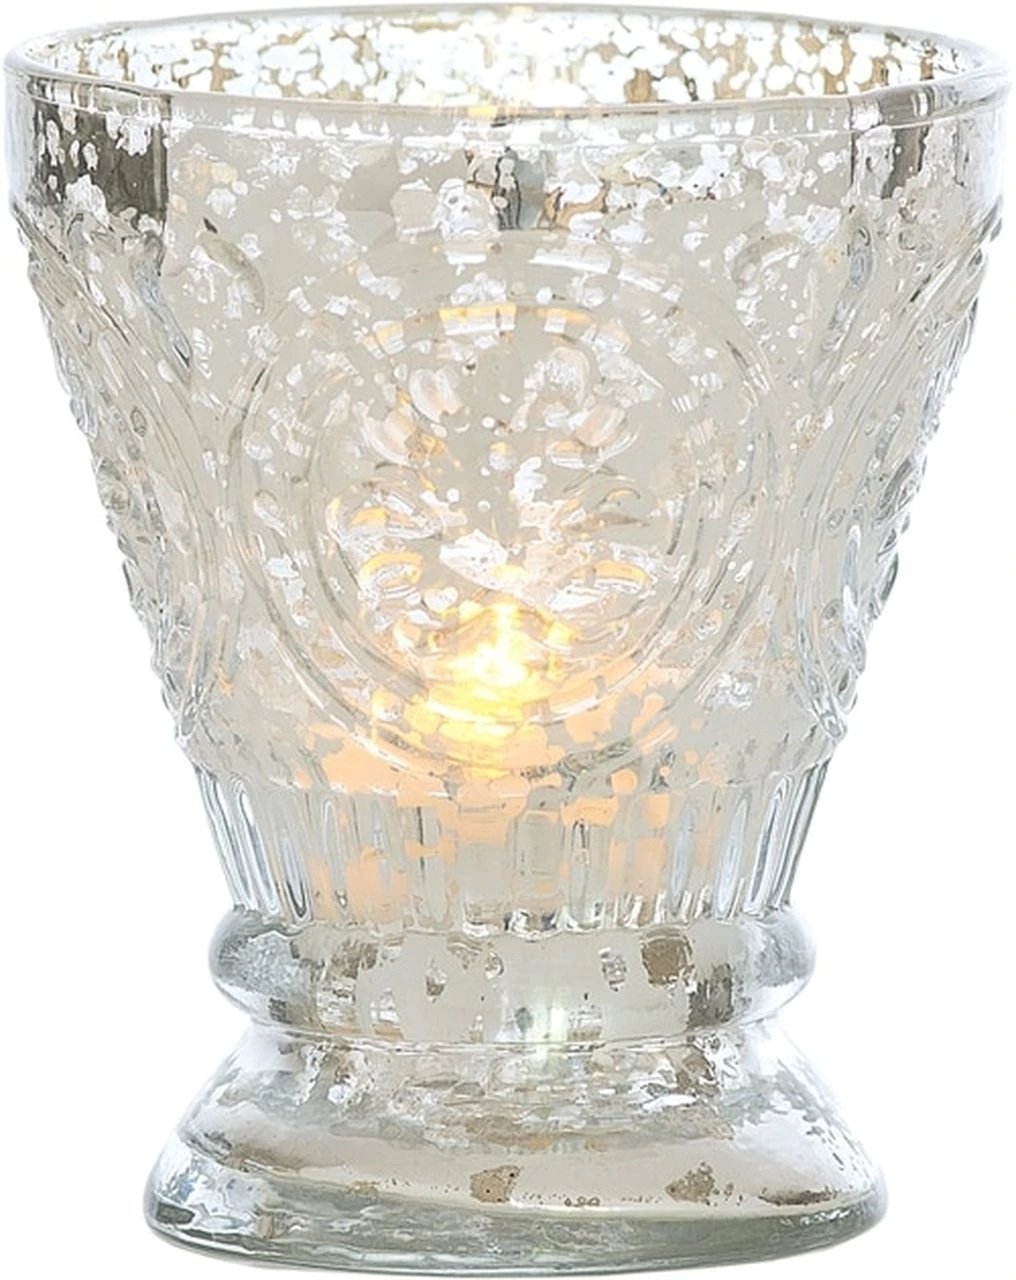 Vintage Mercury Glass Candle Holder (4-Inch, Rosemary Design, Silver) - For Use with Tea Lights - For Home Decor, Parties, and Wedding Decorations - Luna Bazaar | Boho &amp; Vintage Style Decor